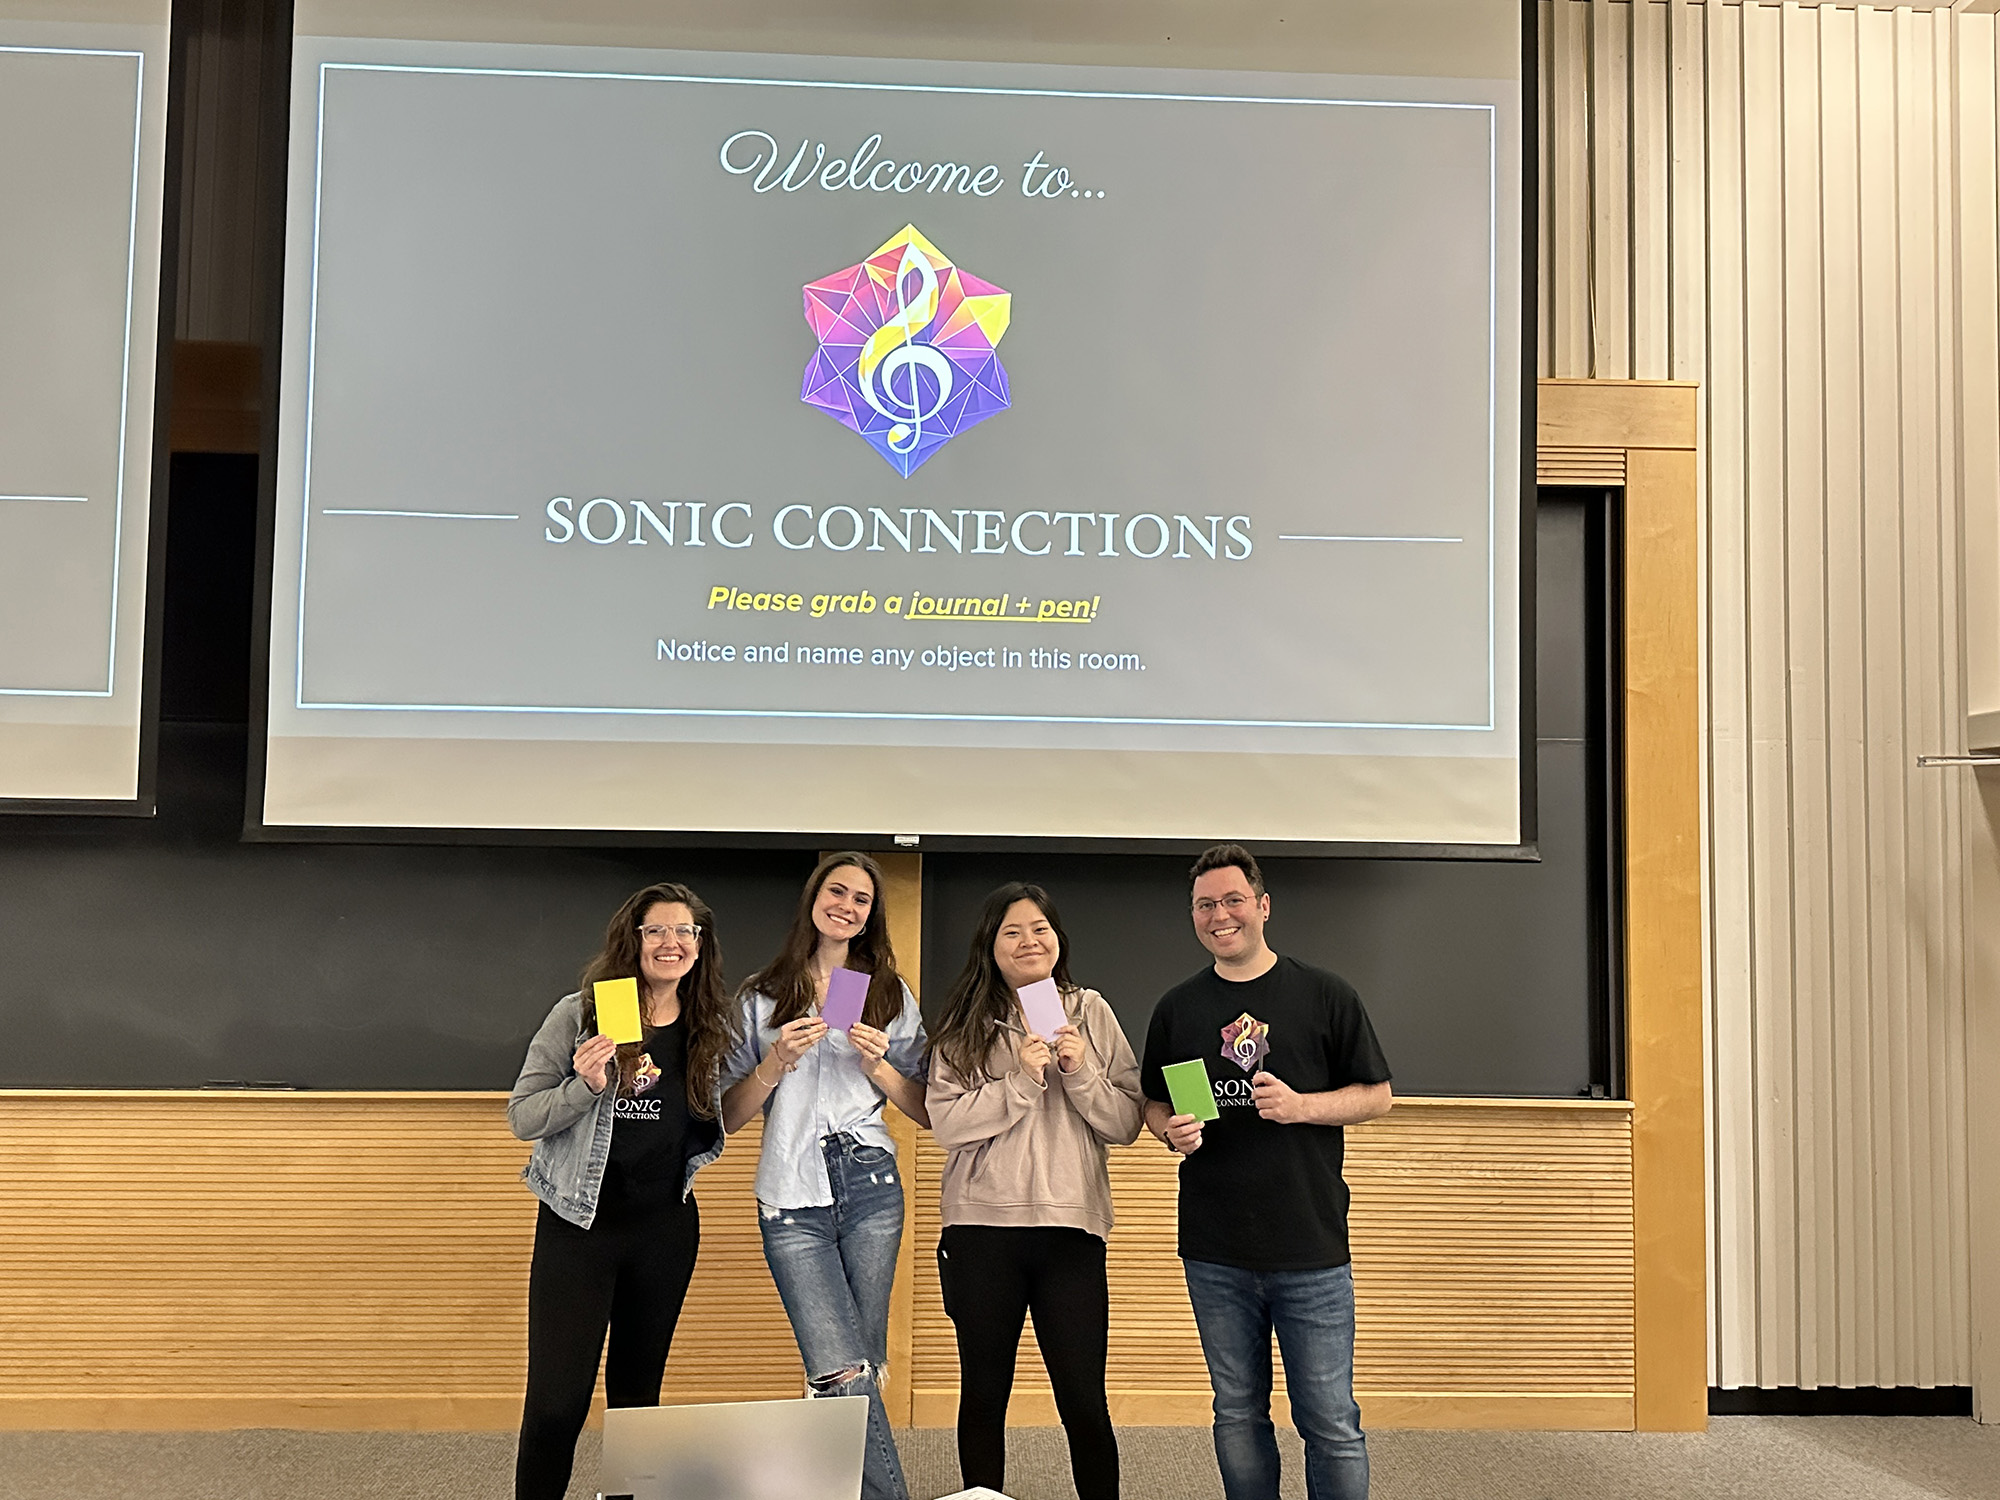 Four people pose with smiles, holding colorful journals in front of a presentation screen that reads "Welcome to... SONIC CONNECTIONS at Wheaton College."